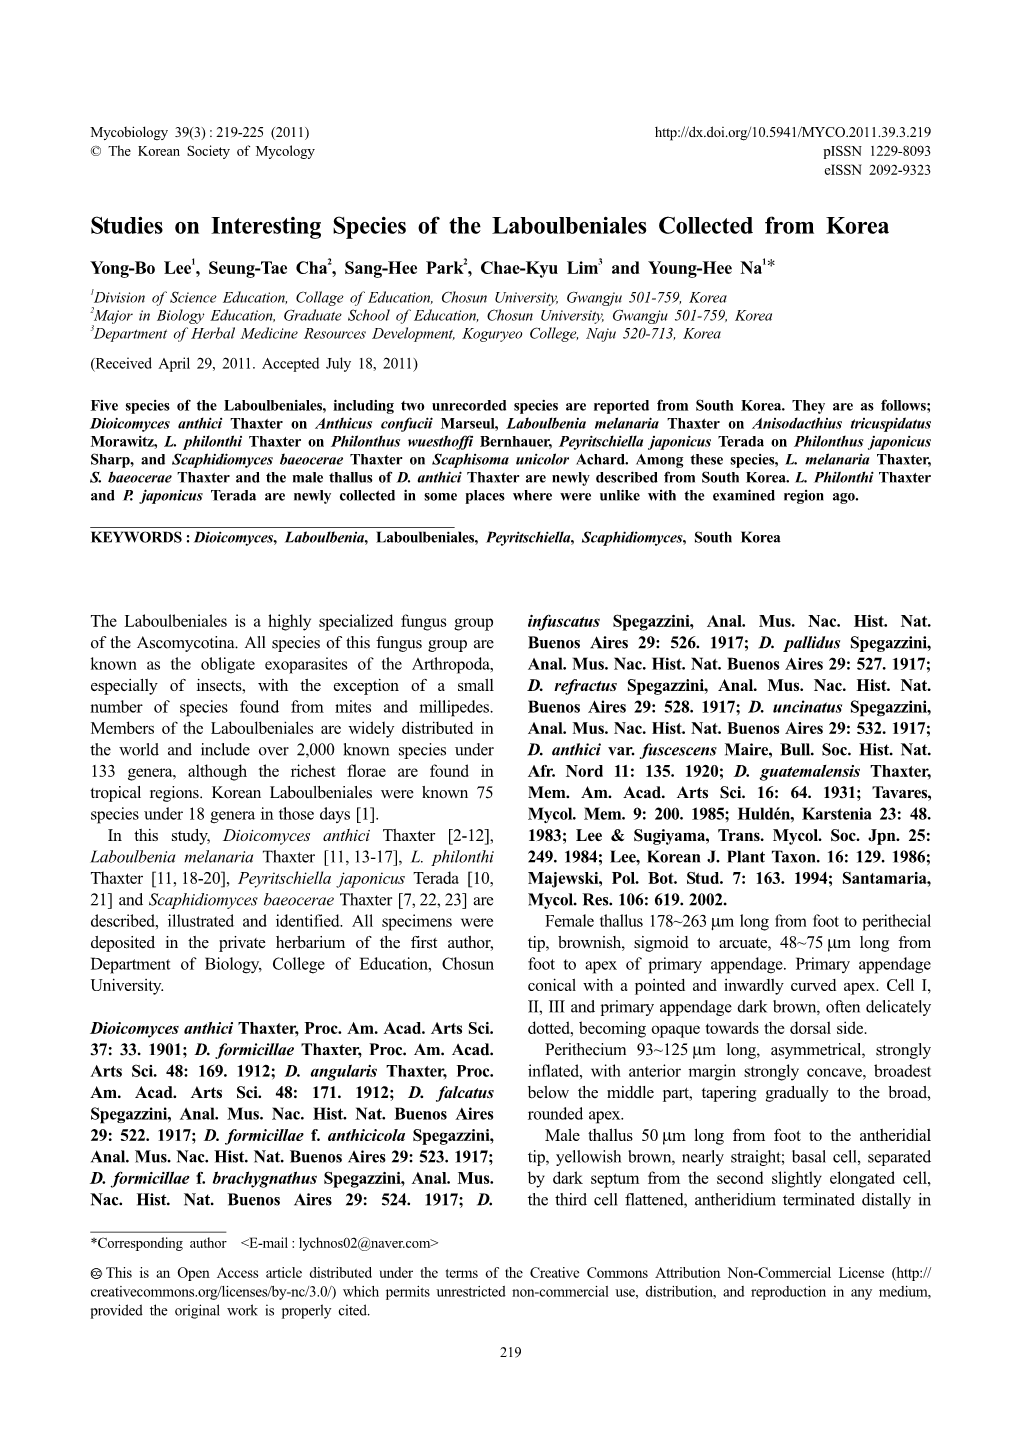 Studies on Interesting Species of the Laboulbeniales Collected from Korea